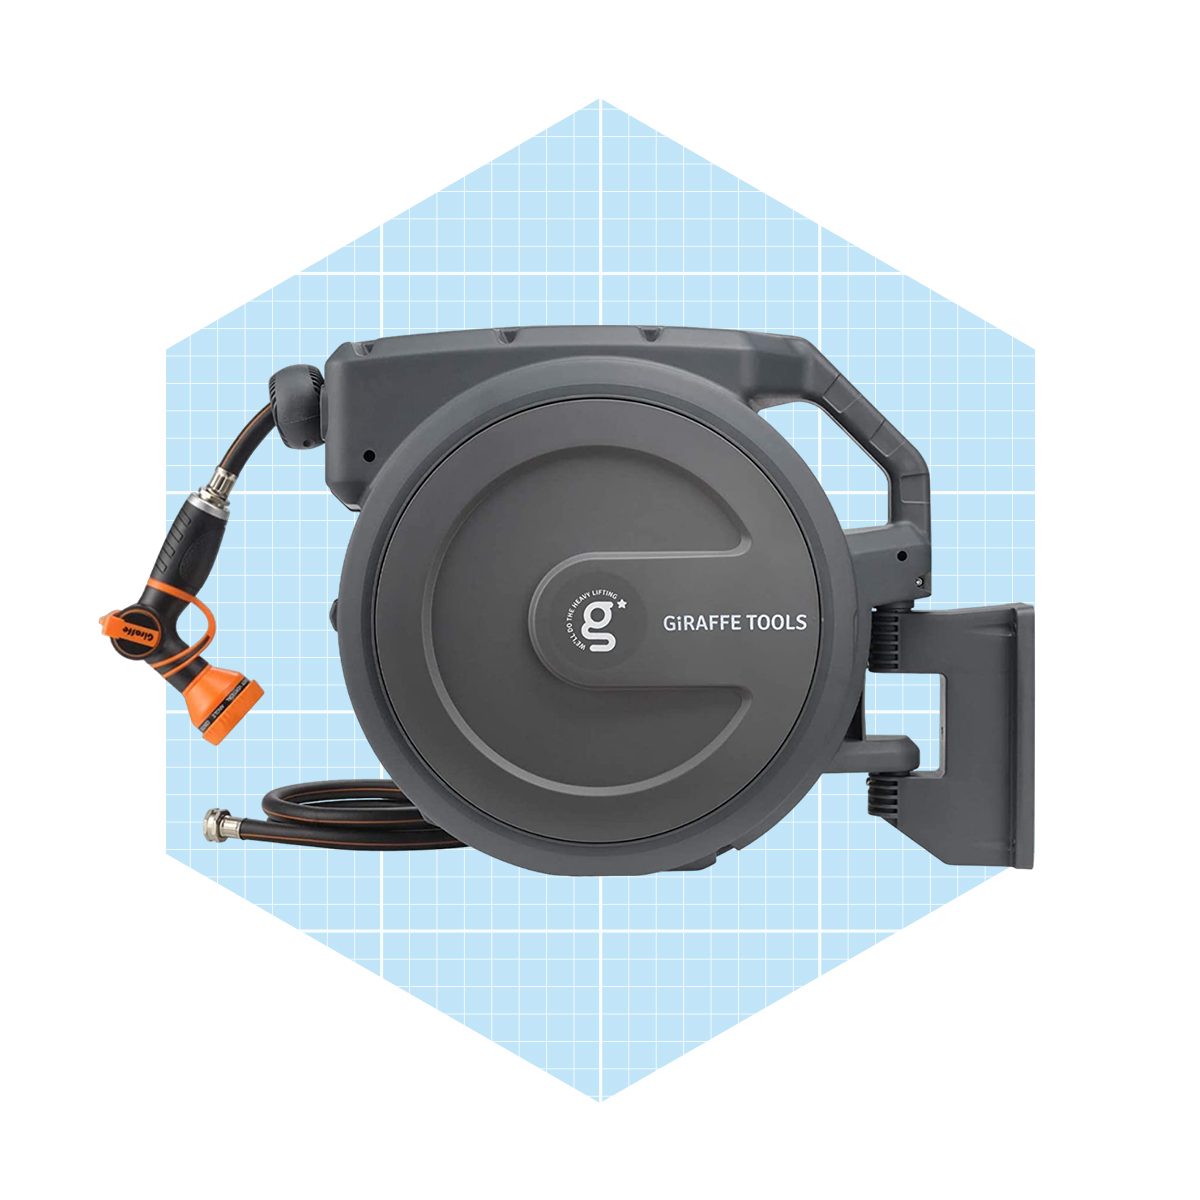 Best location to wall mount retractable hose reel (photo included